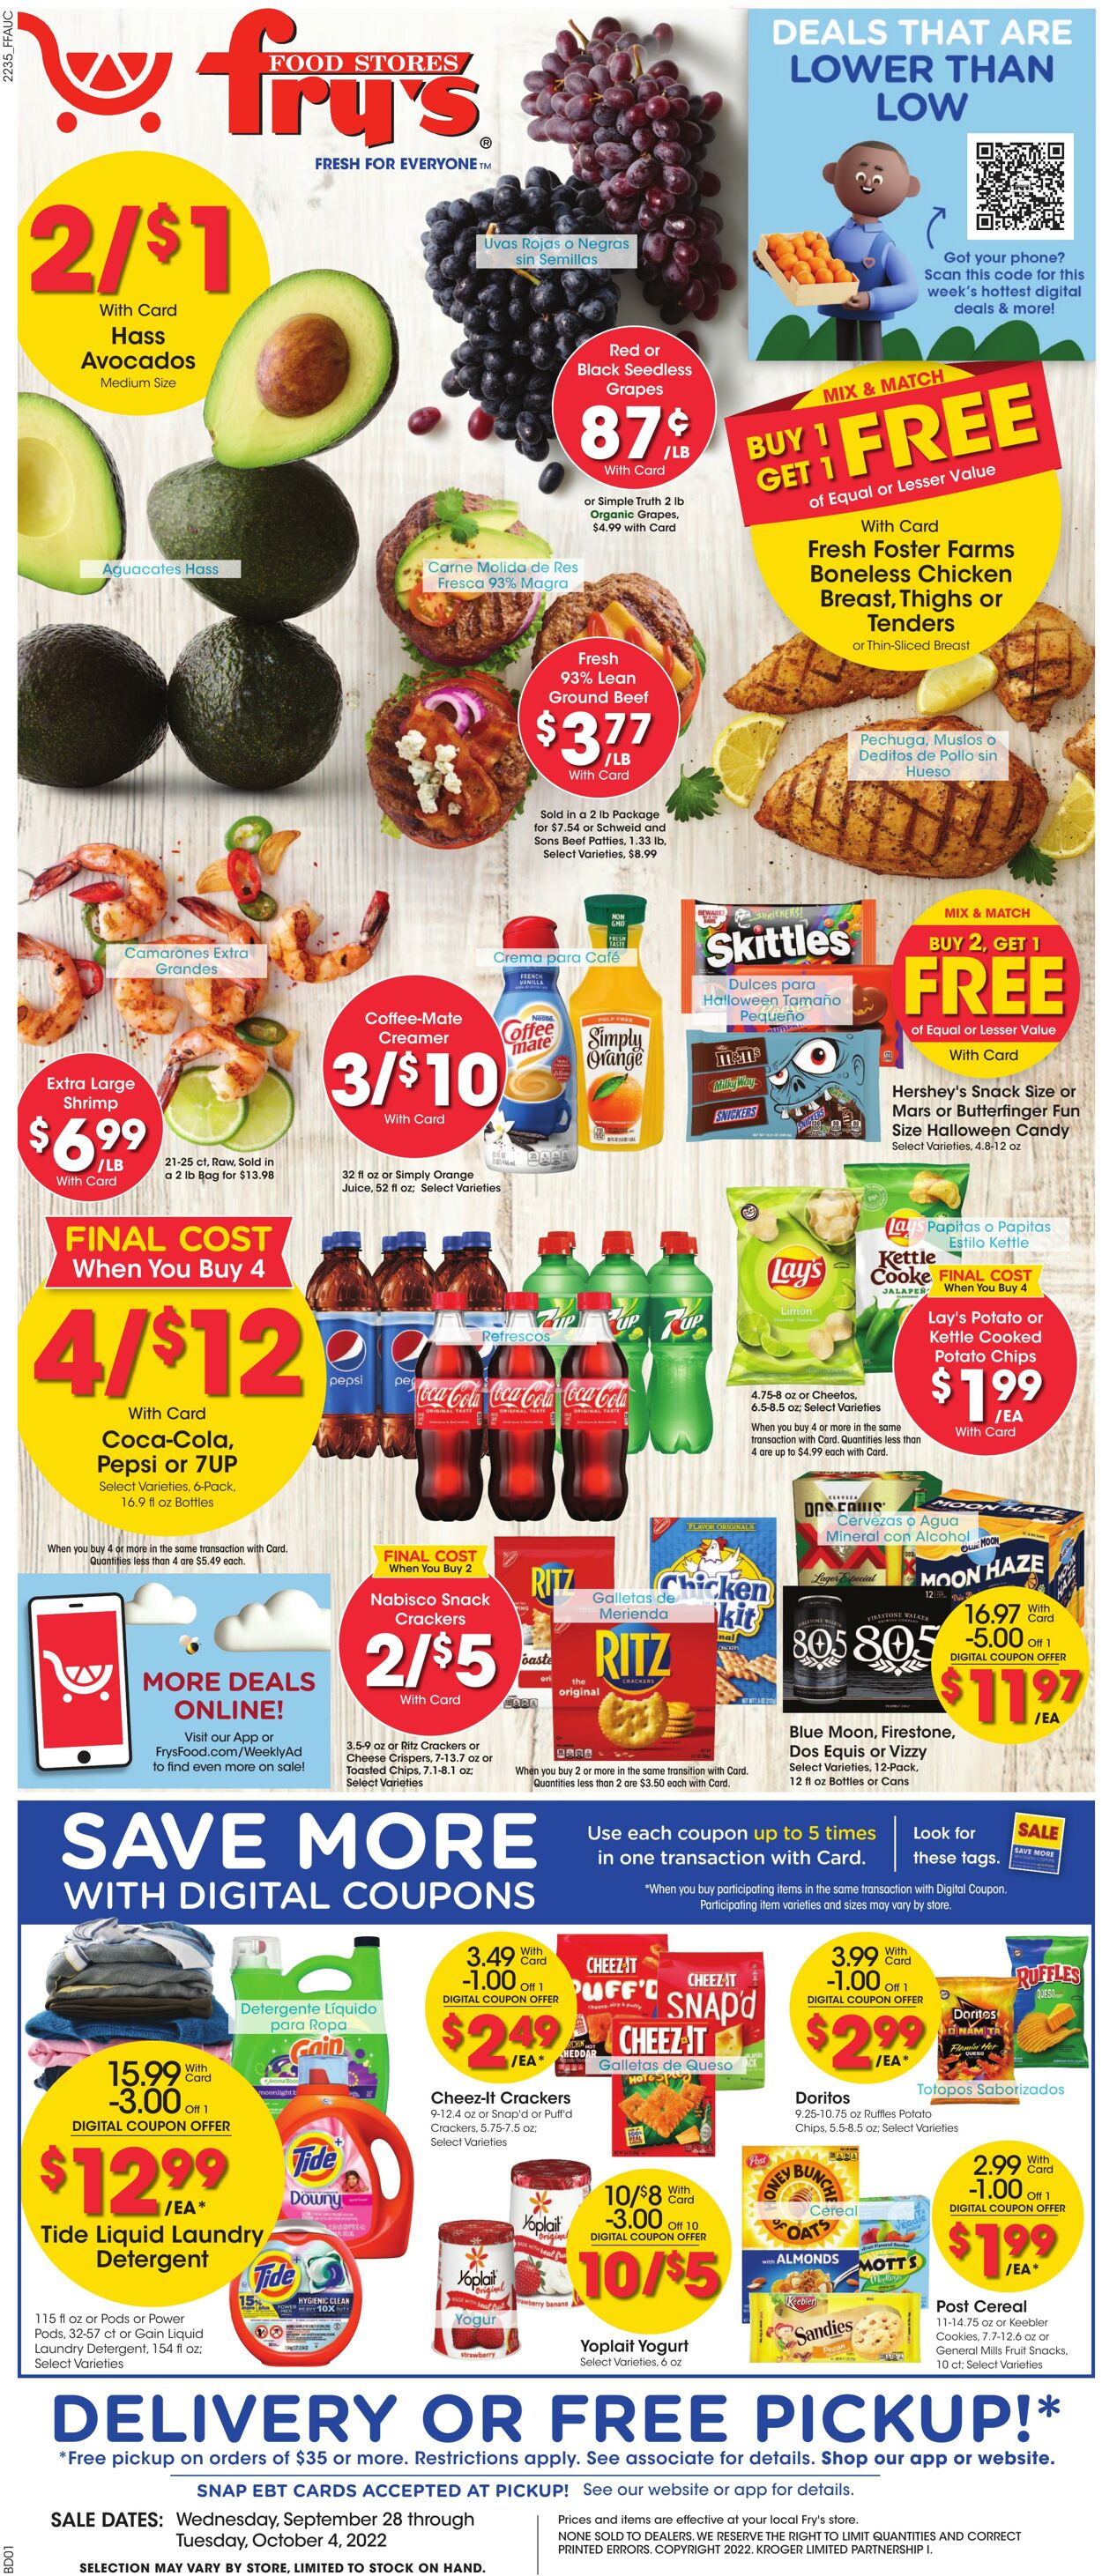 Fry's Promotional weekly ads